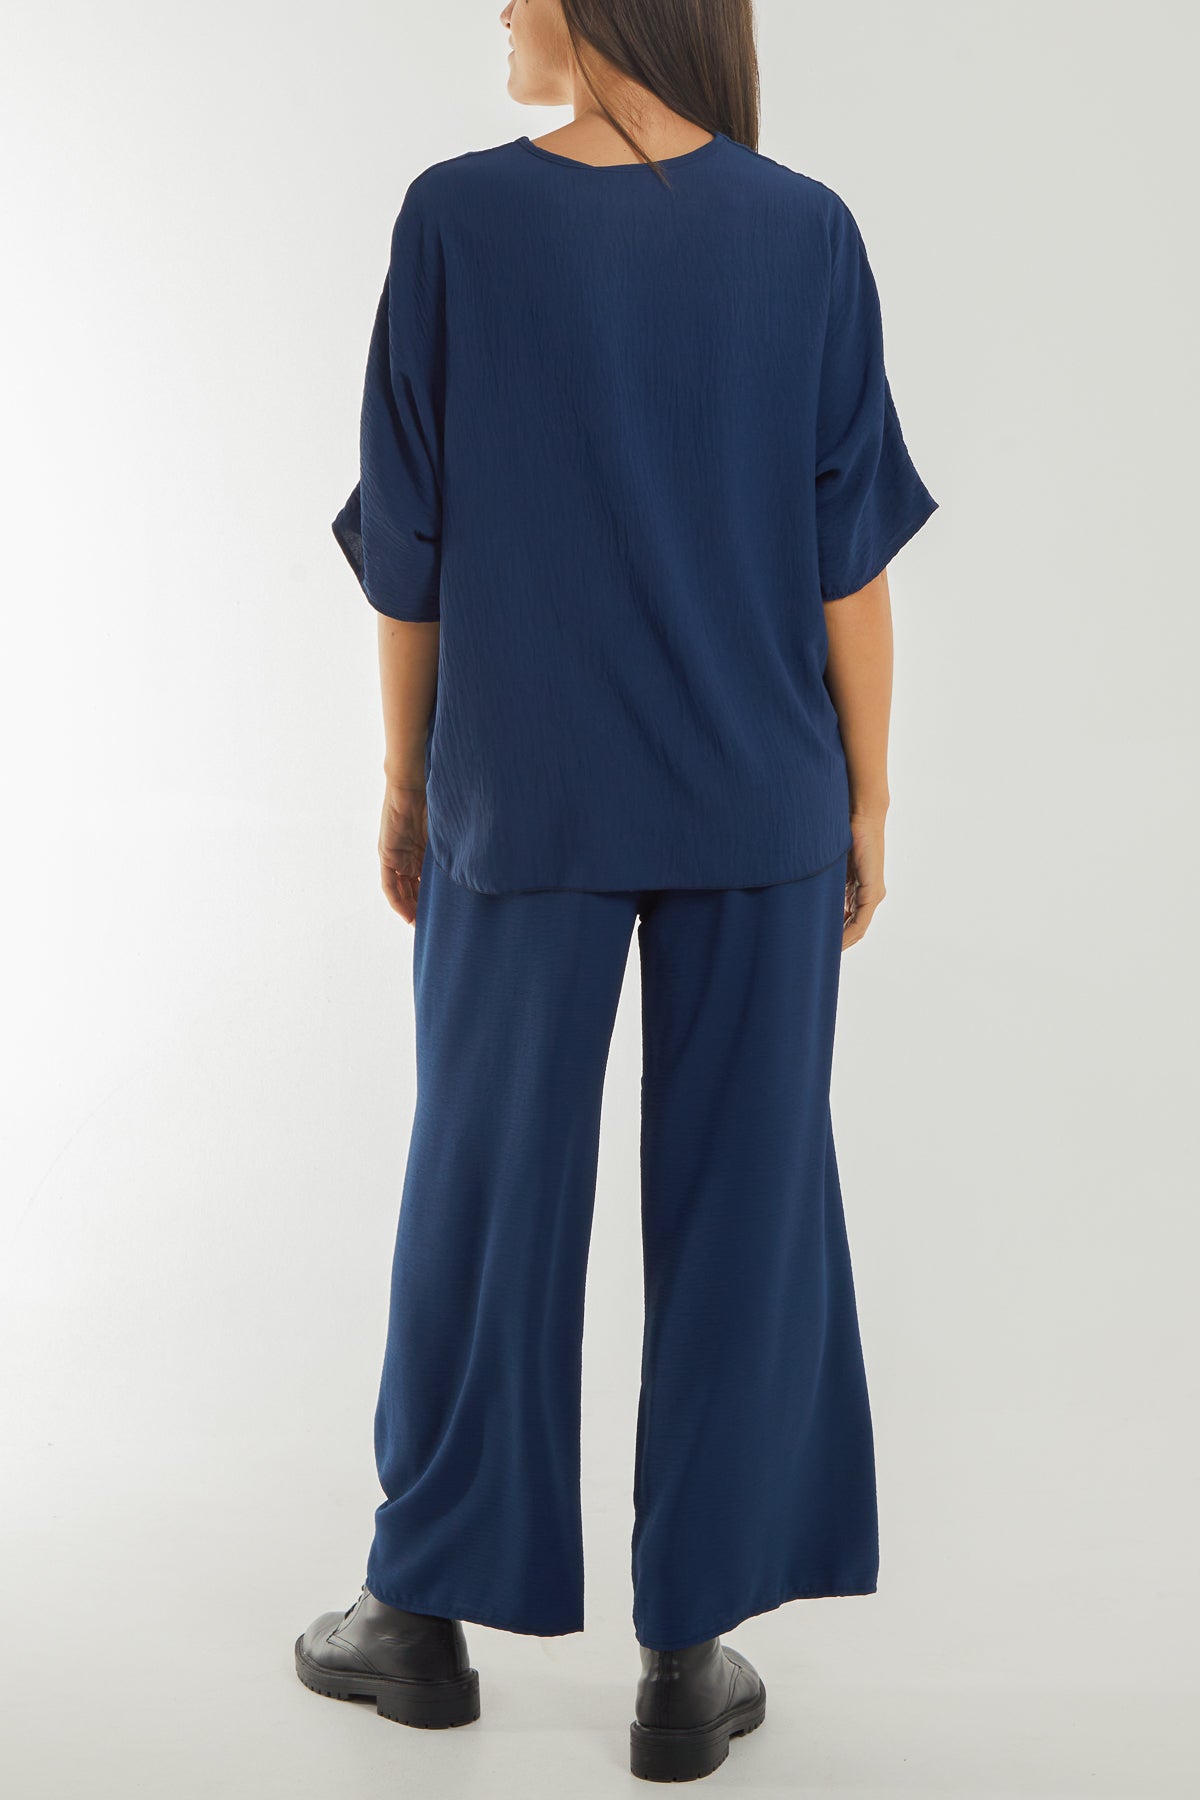 Knotted Front Top & Culottes Co-Ord Set